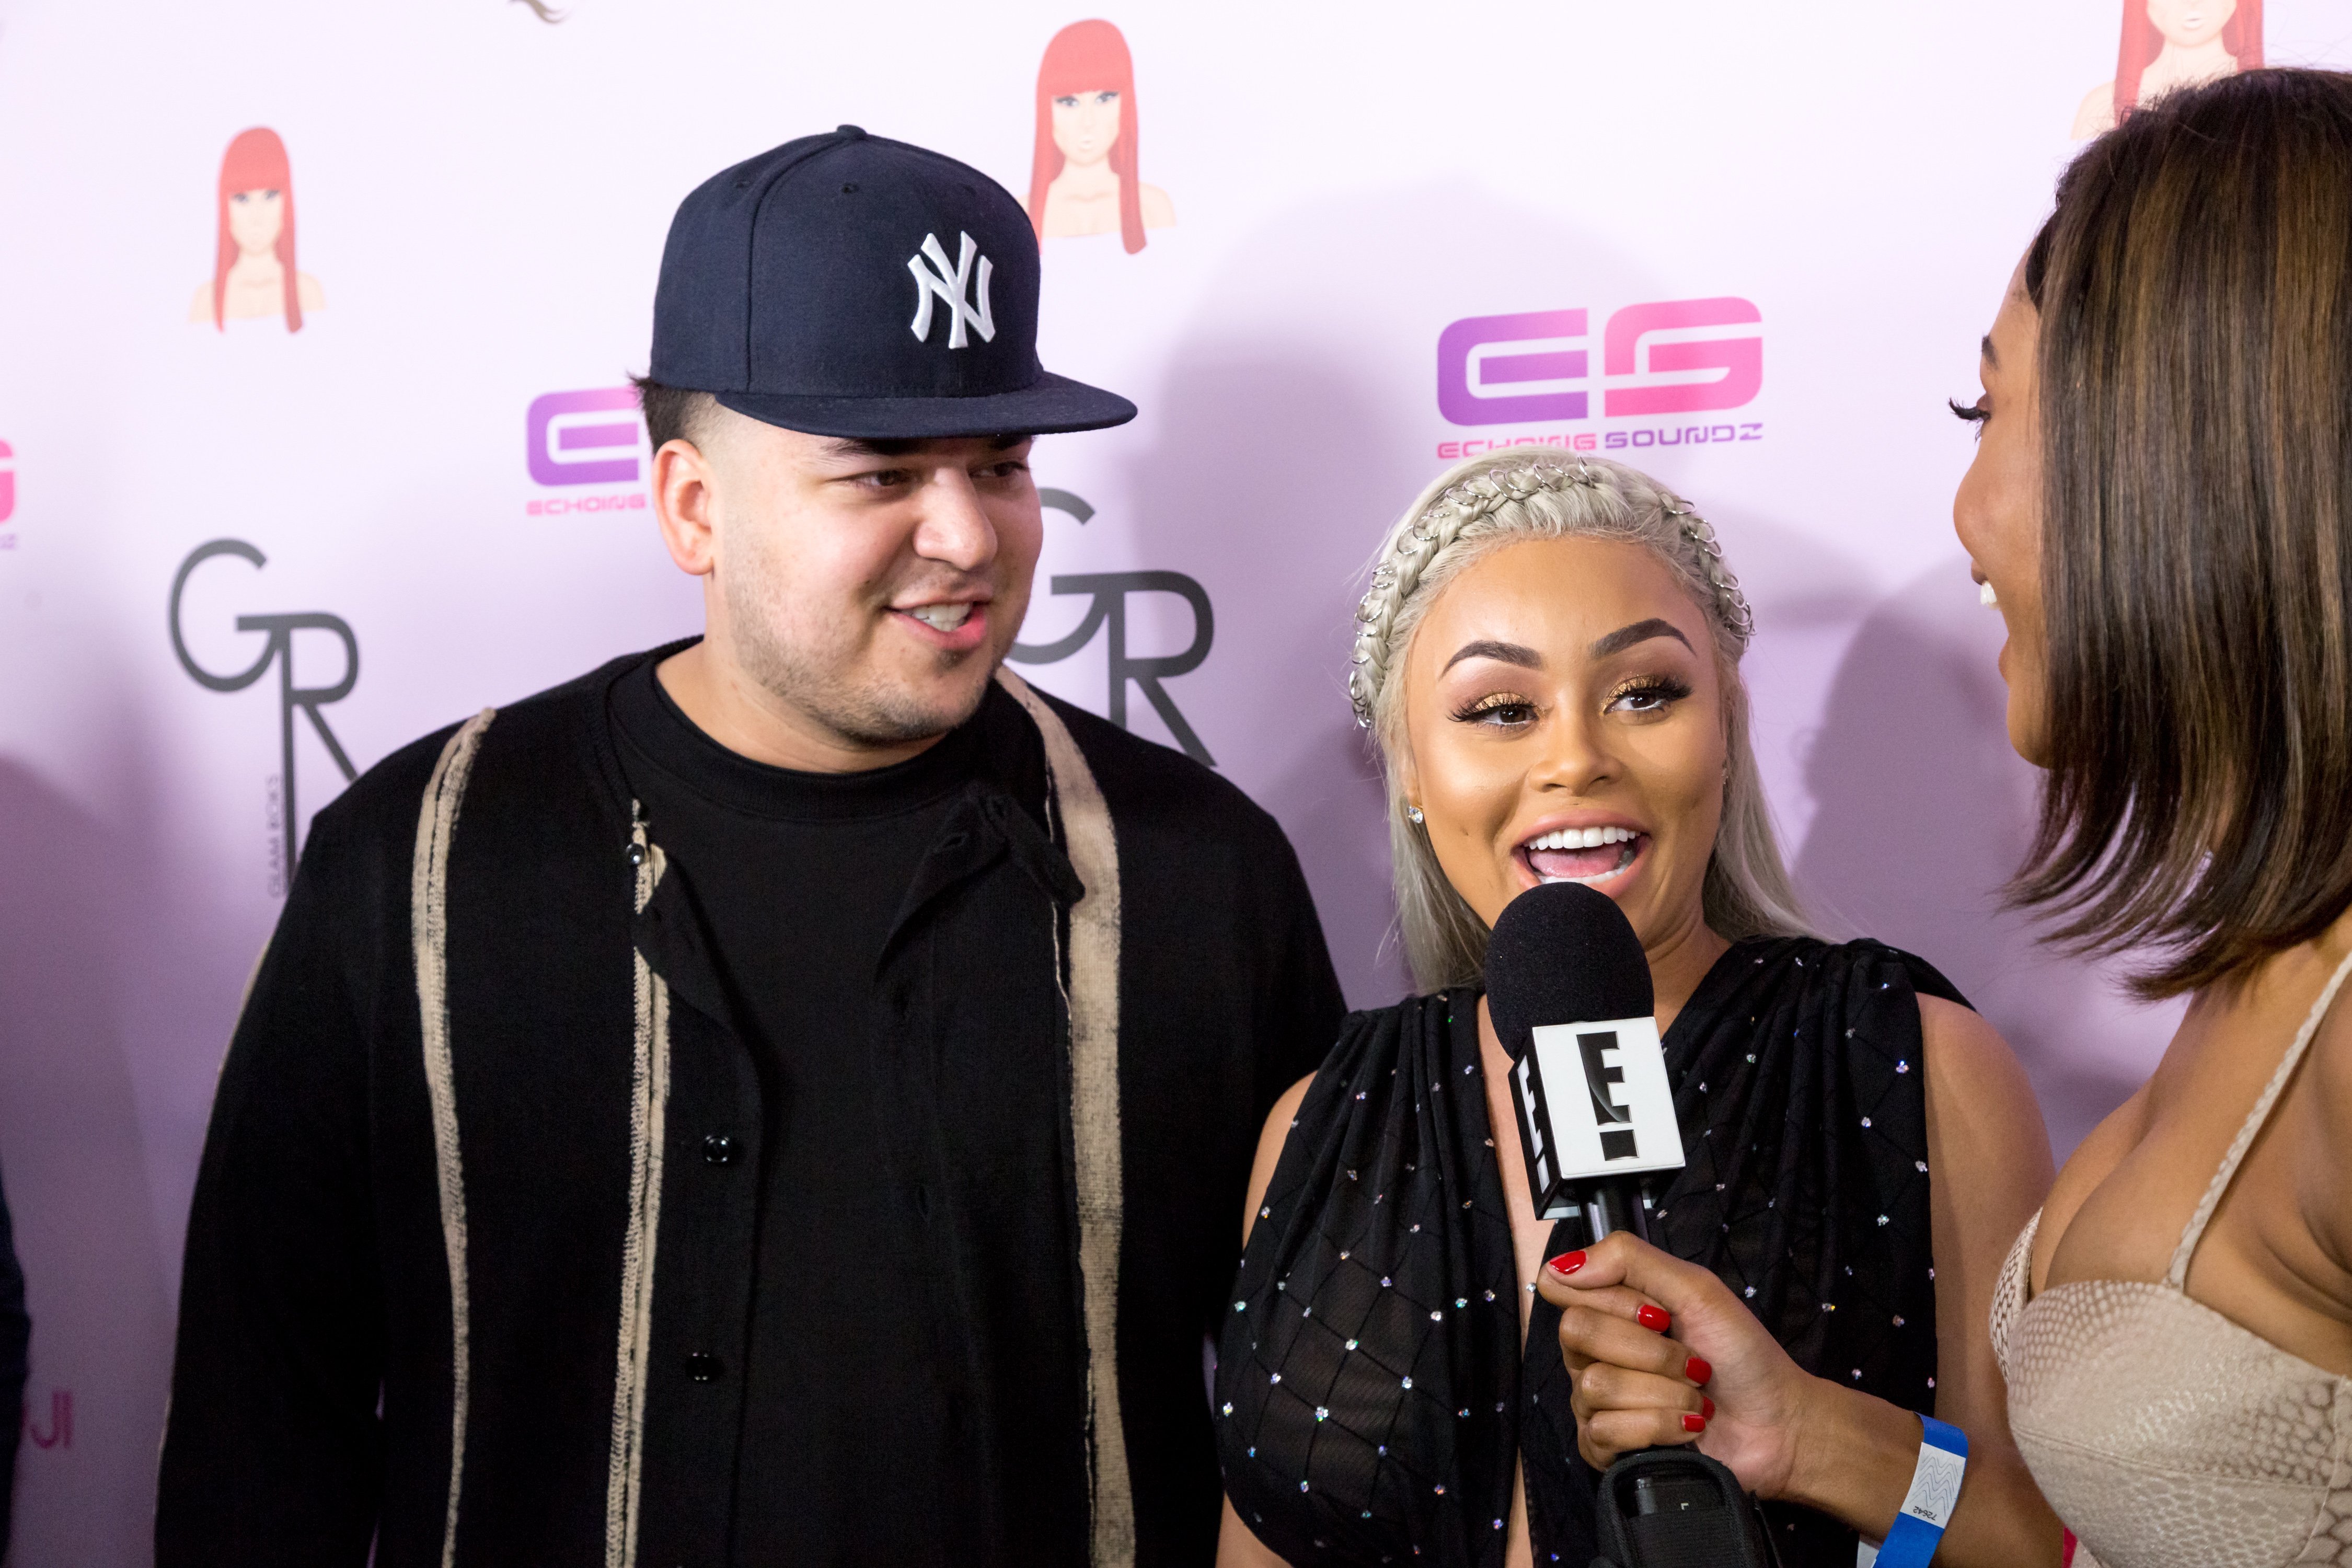 Rob Kardashian & Blac Chyna at her Blac Chyna Birthday Celebration And Unveiling Of Her "Chymoji" Emoji Collection on May 10, 2016. | Photo: Getty Images